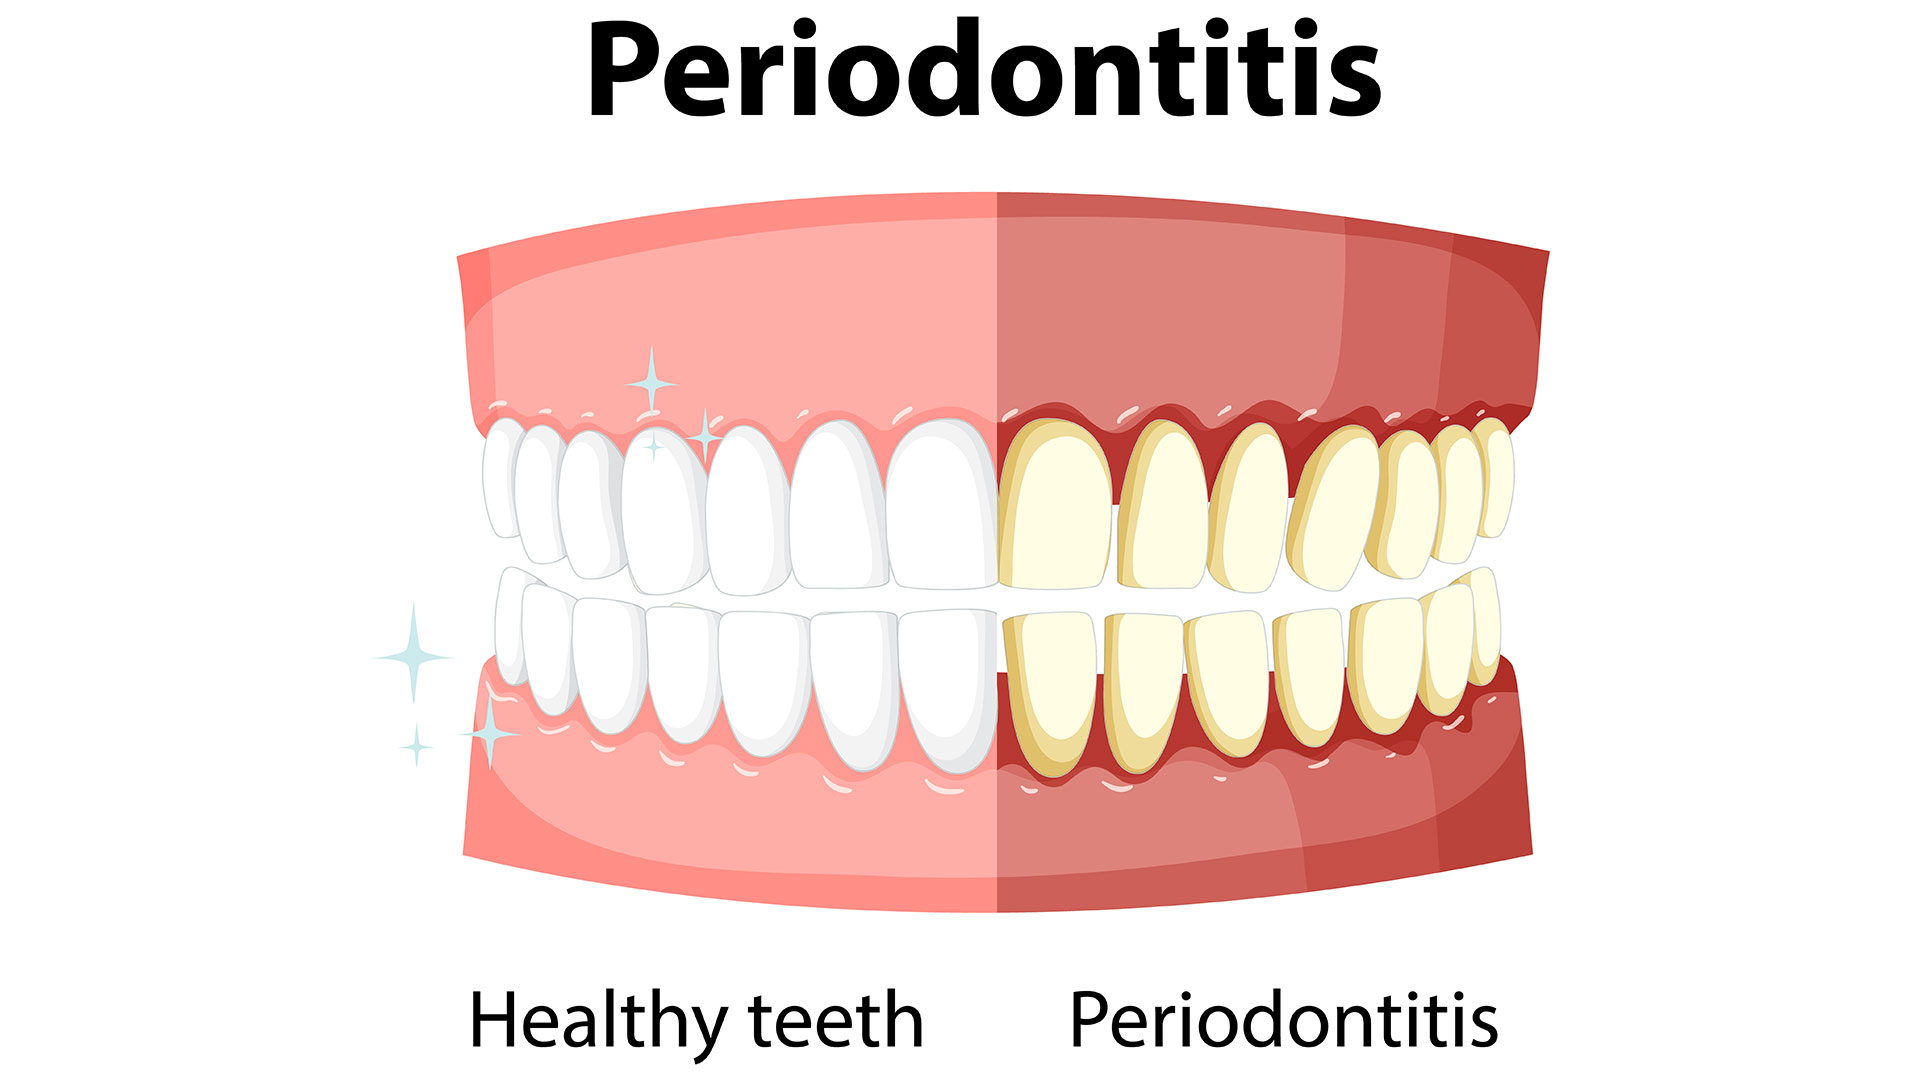 Pericoronitis treatment at home: Taming the Wisdom Toothache